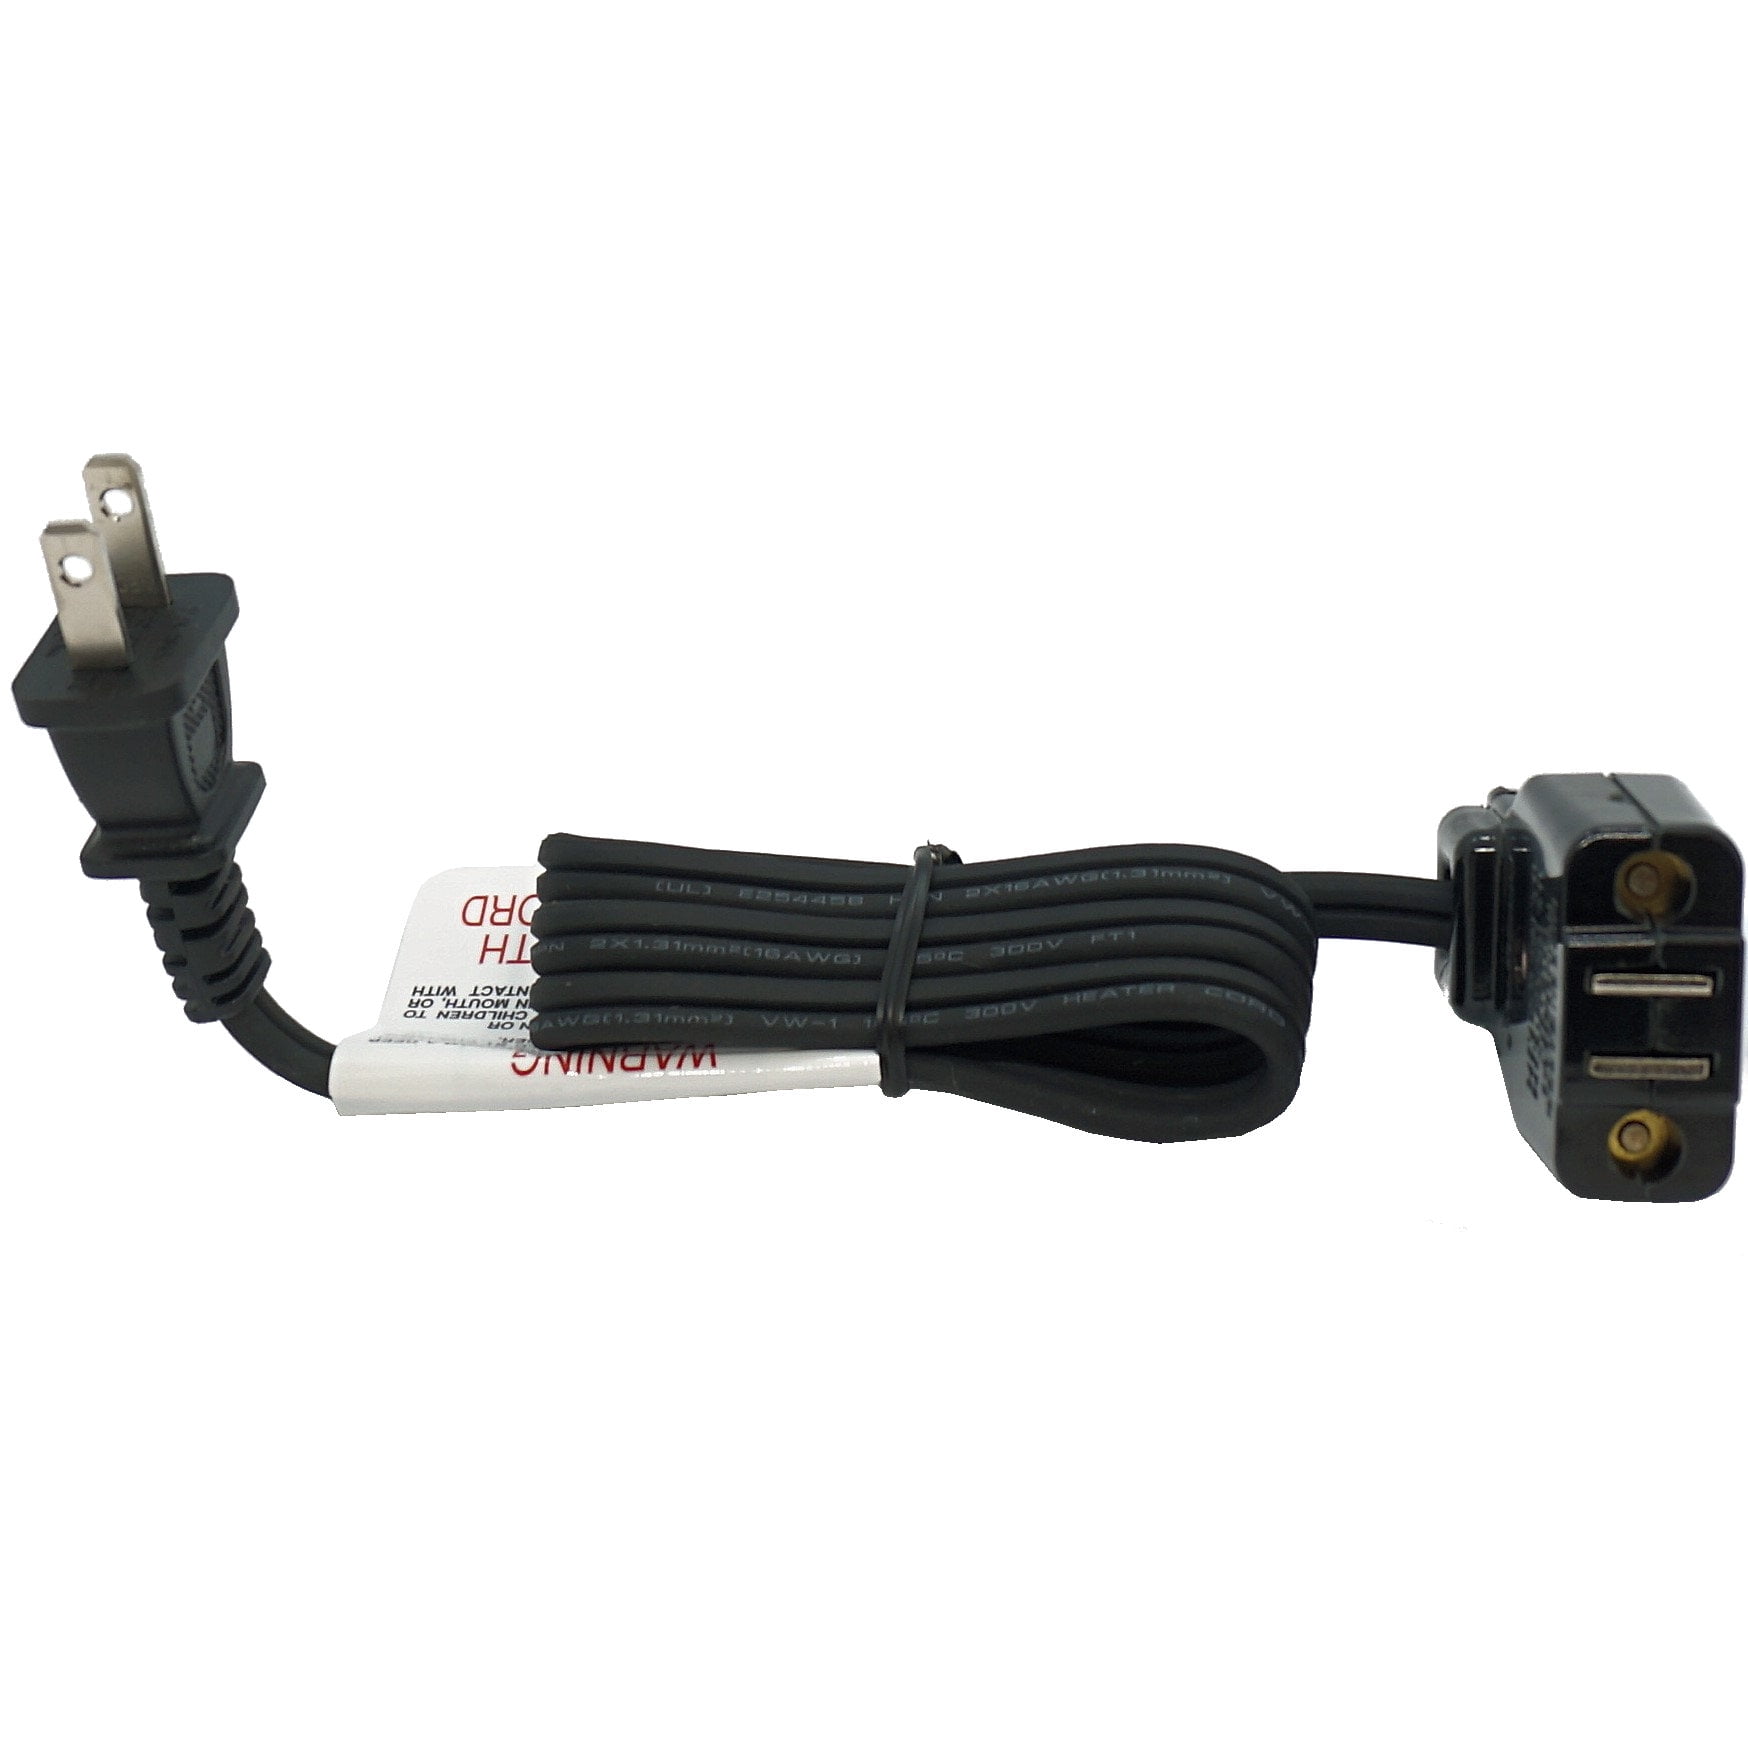 Deep Fryer Cord - Break Away Safety Cord Compatible with Presto Profry